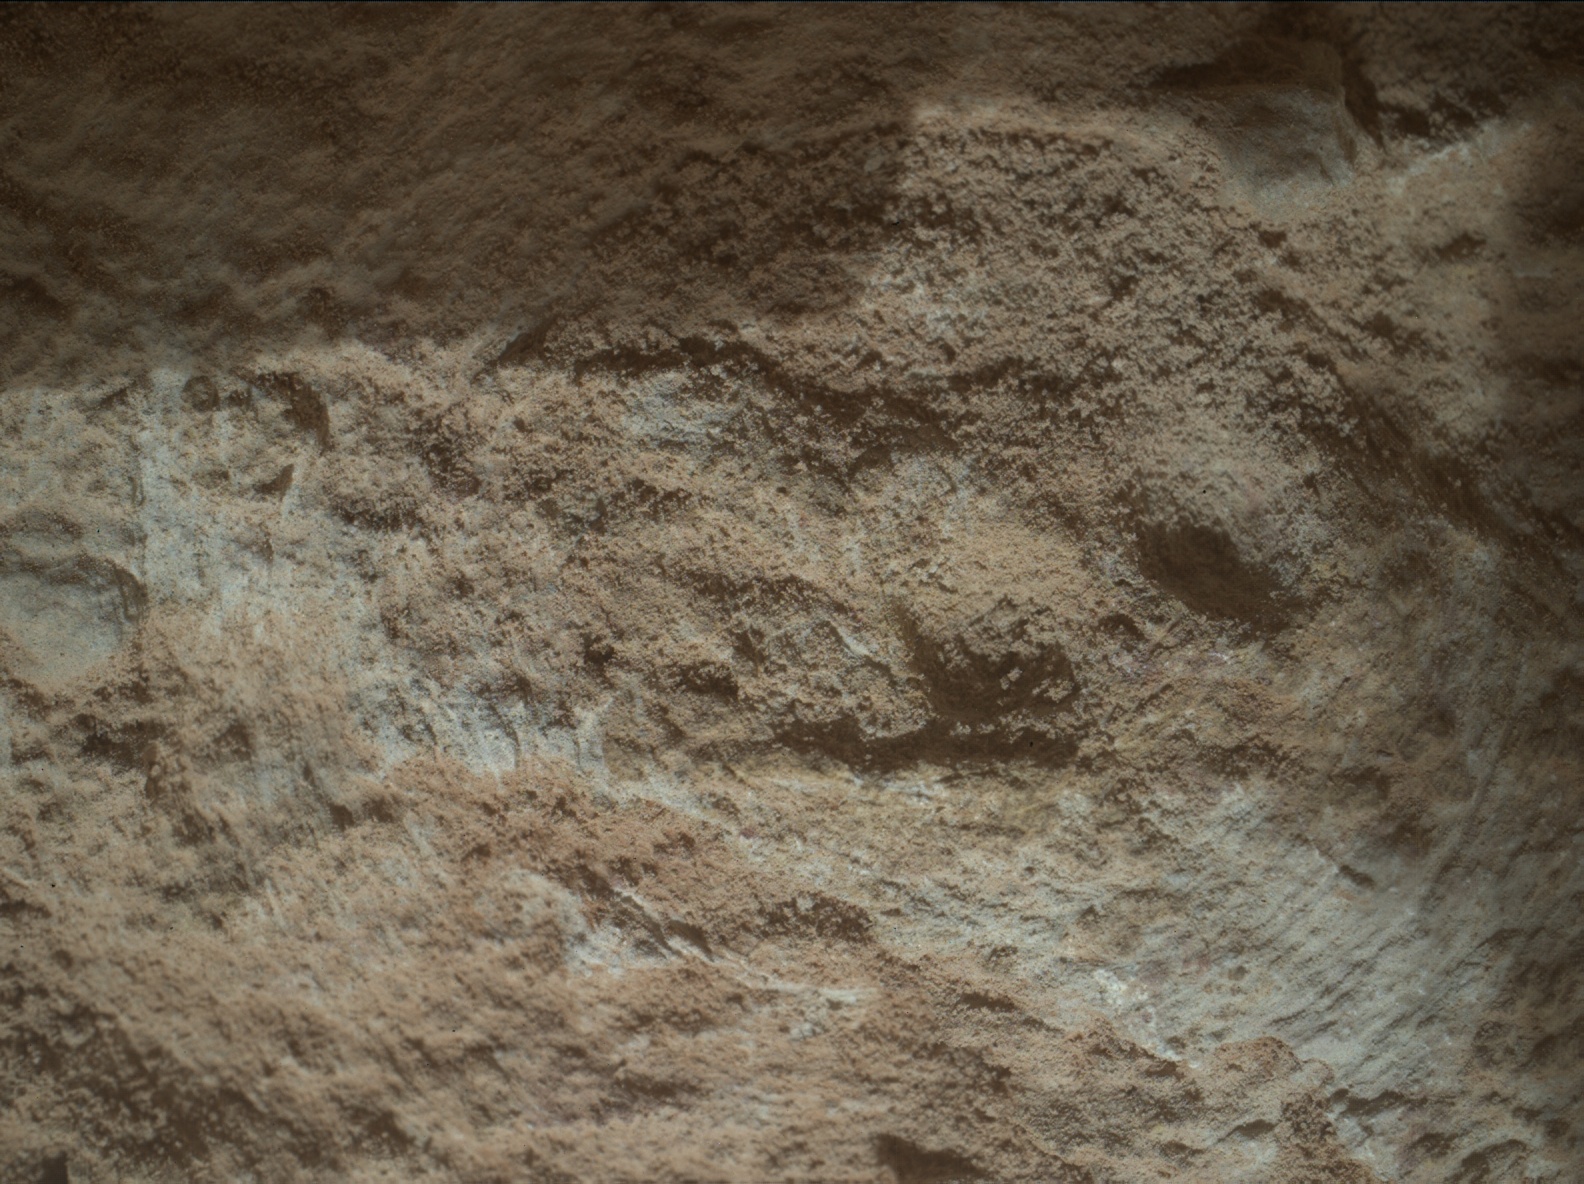 Nasa's Mars rover Curiosity acquired this image using its Mars Hand Lens Imager (MAHLI) on Sol 3712